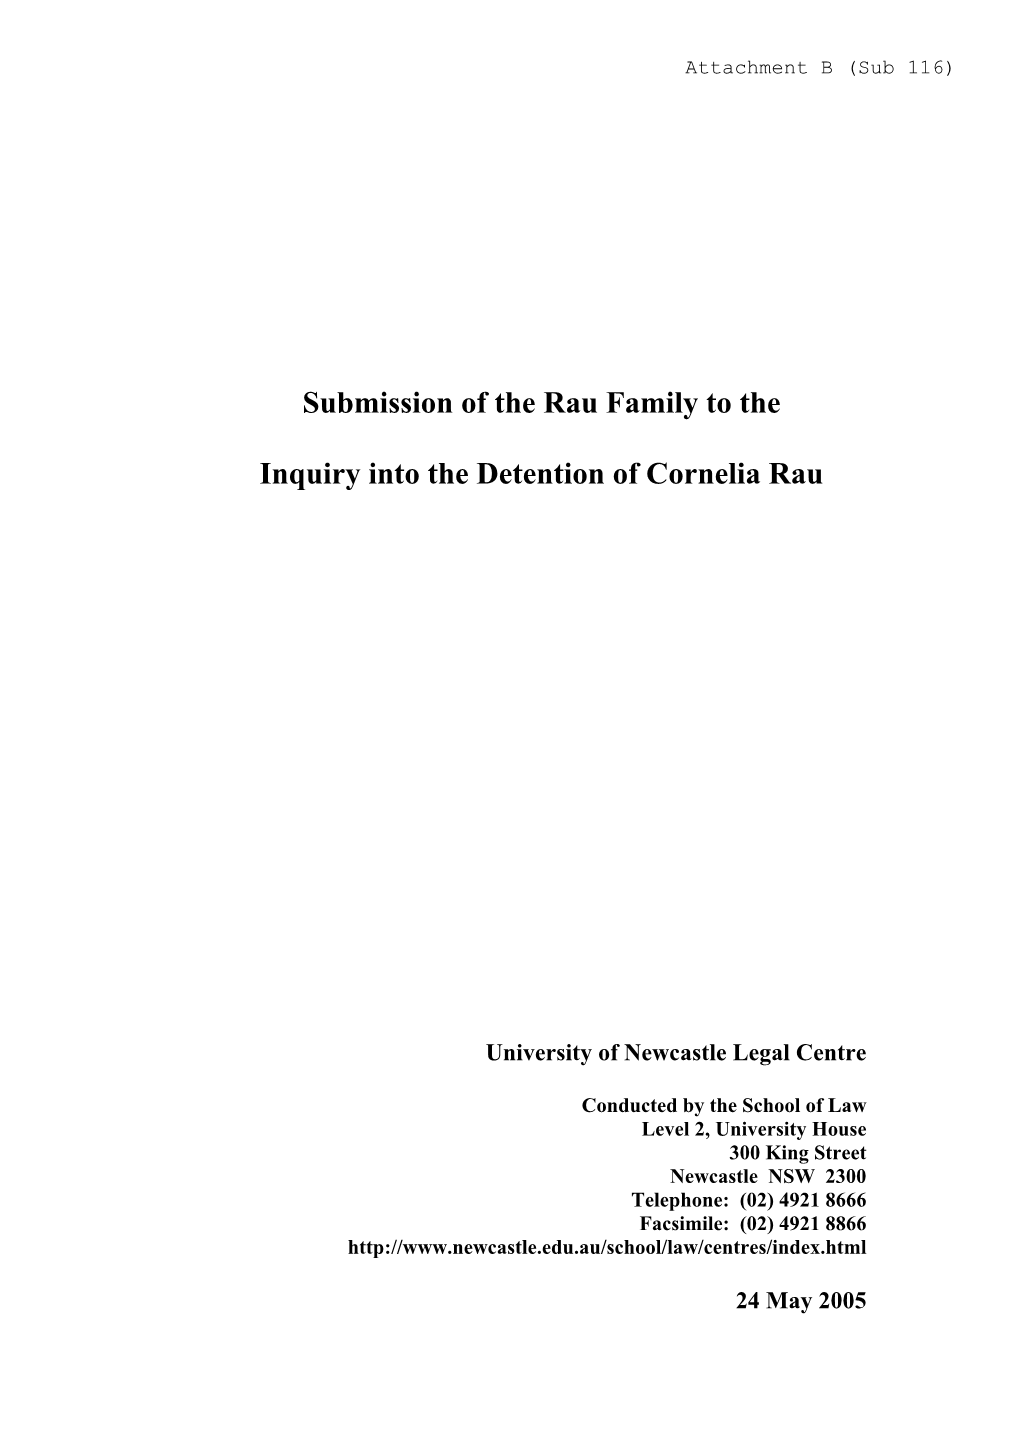 Submission of the Rau Family to the Inquiry Into the Detention Of